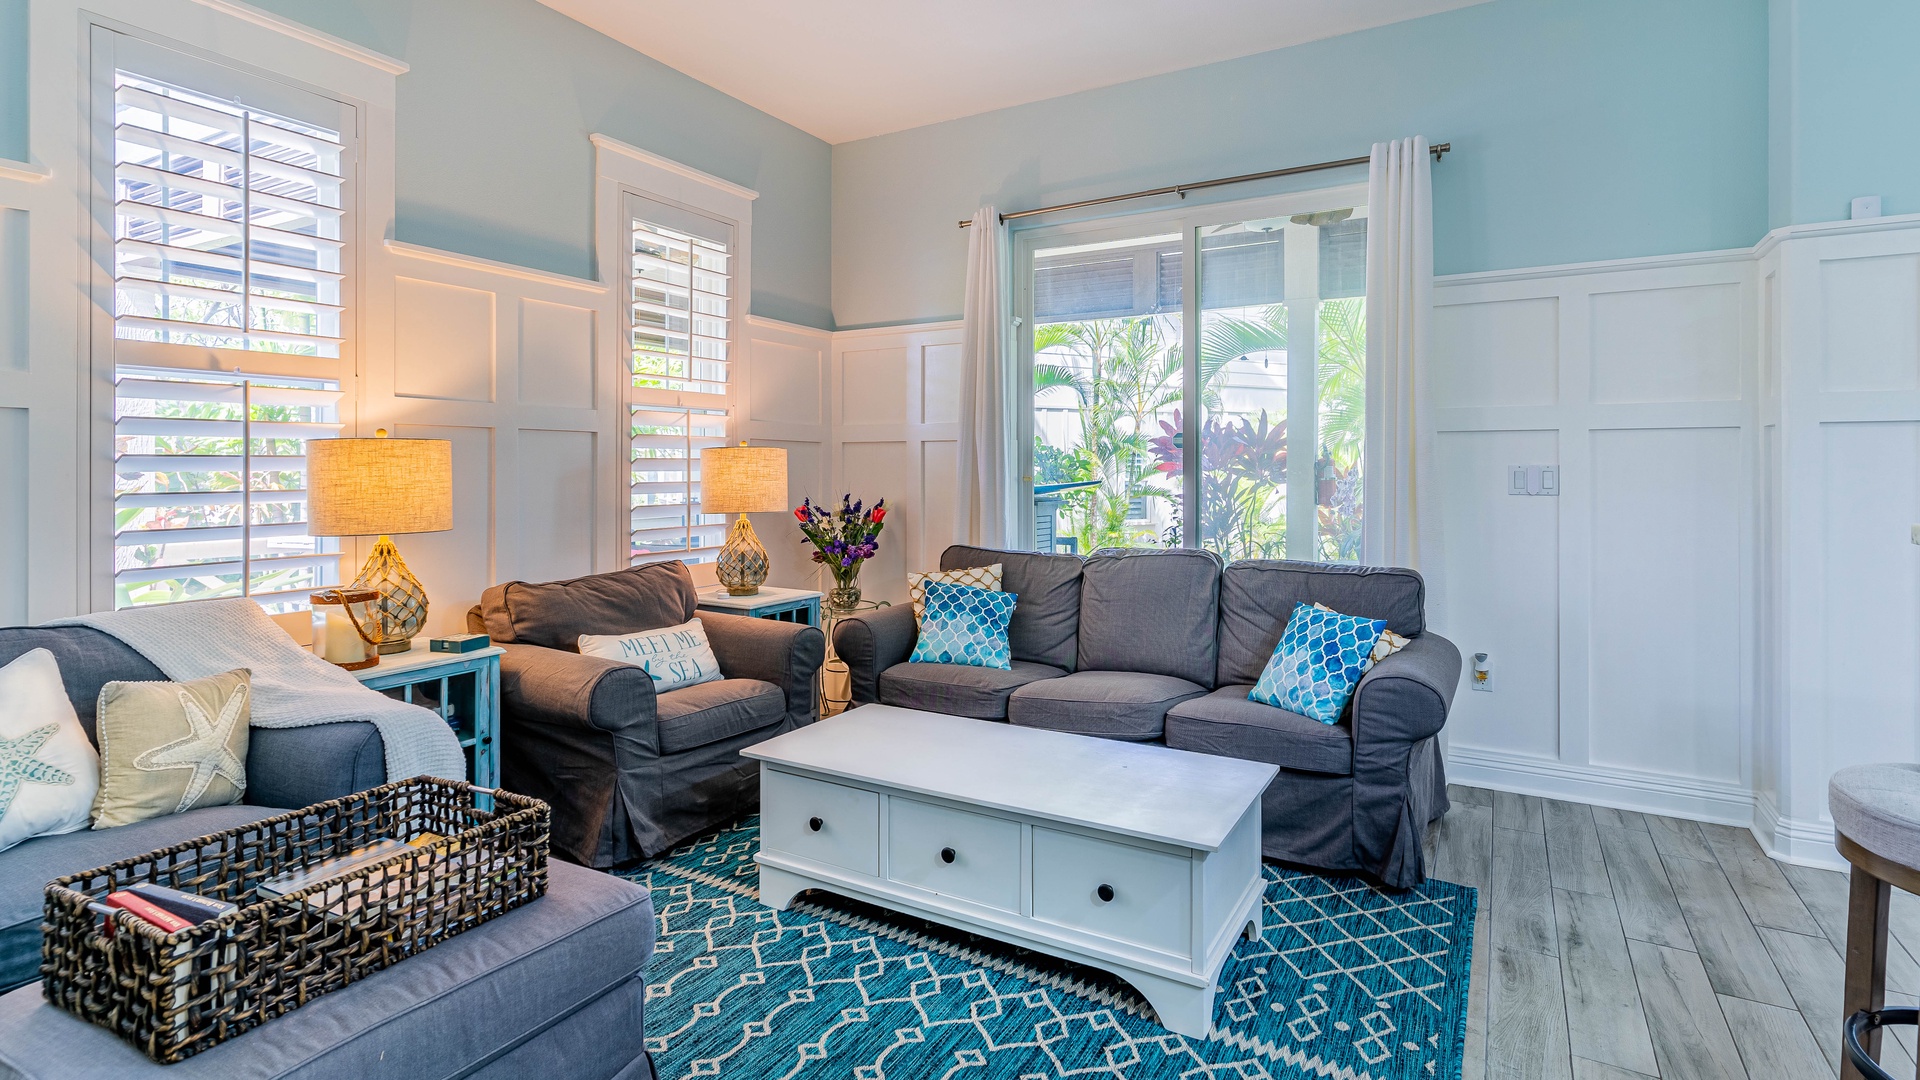 Kapolei Vacation Rentals, Coconut Plantation 1074-4 - Sink into the plush seating in the living area surrounded by colors of the ocean..